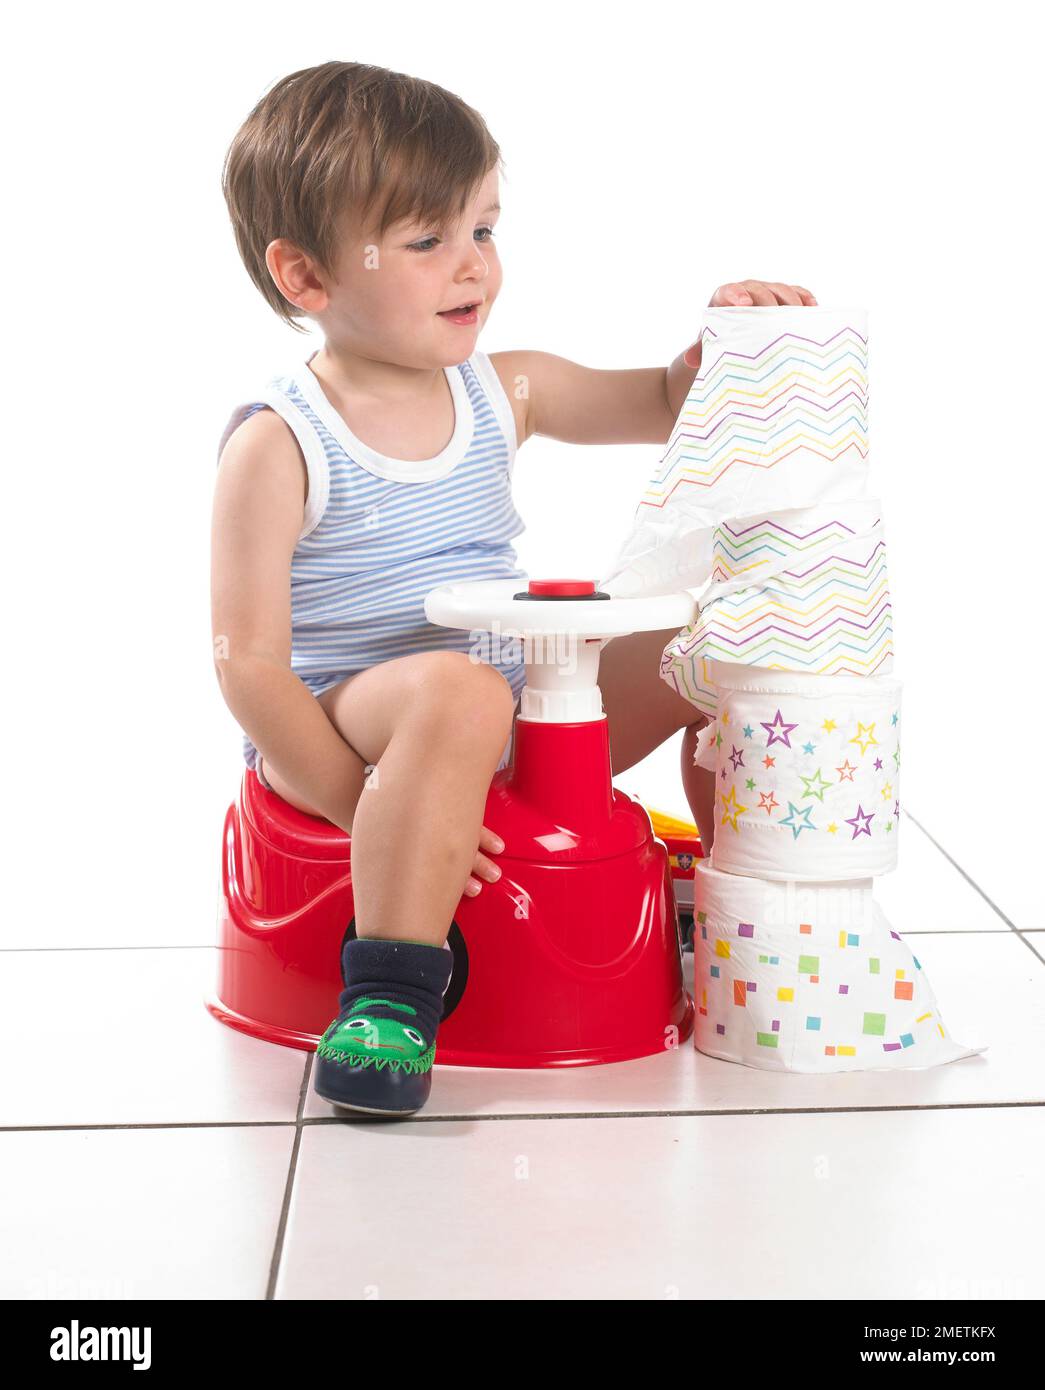 Boy sitting on a potty shaped as a car with steering wheel next to a tower of toilet rolls, 20 months Stock Photo